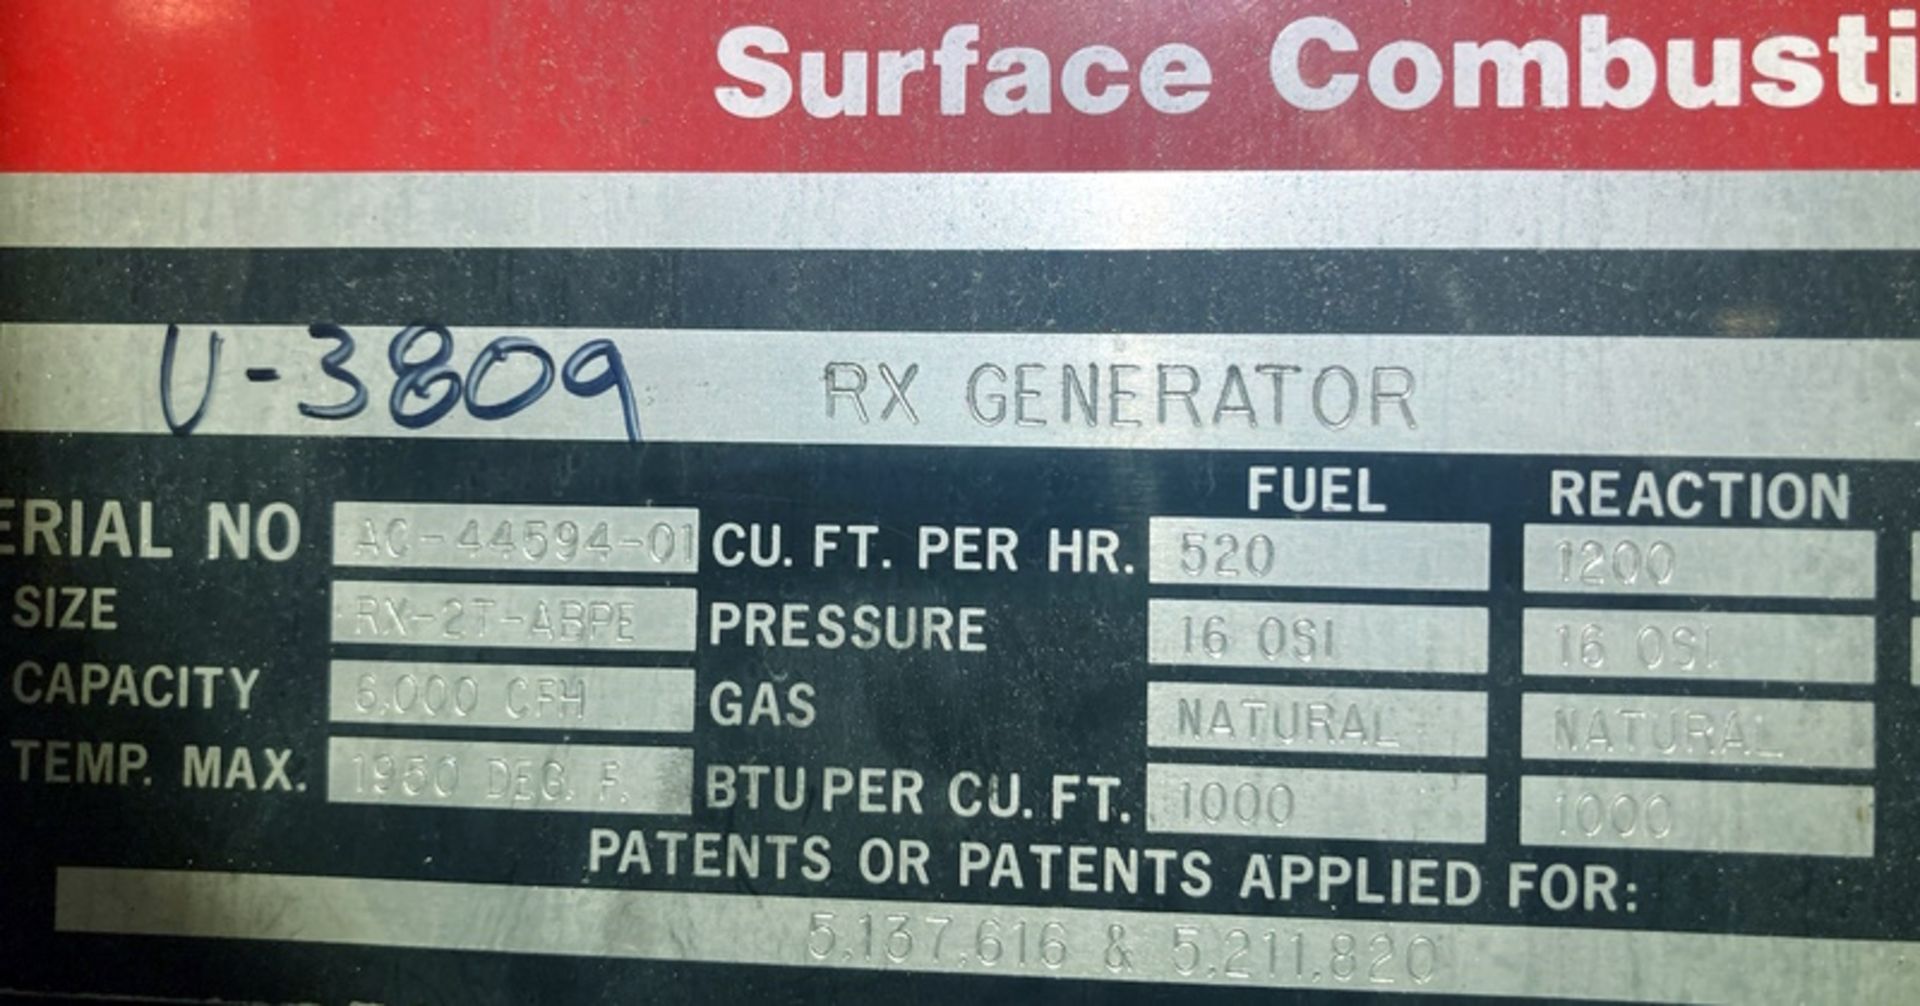 Surface Combustion RX-2T-ABPE 6000 CFH Endothermic Gas Generatpr, 2 Retorts - Image 7 of 7